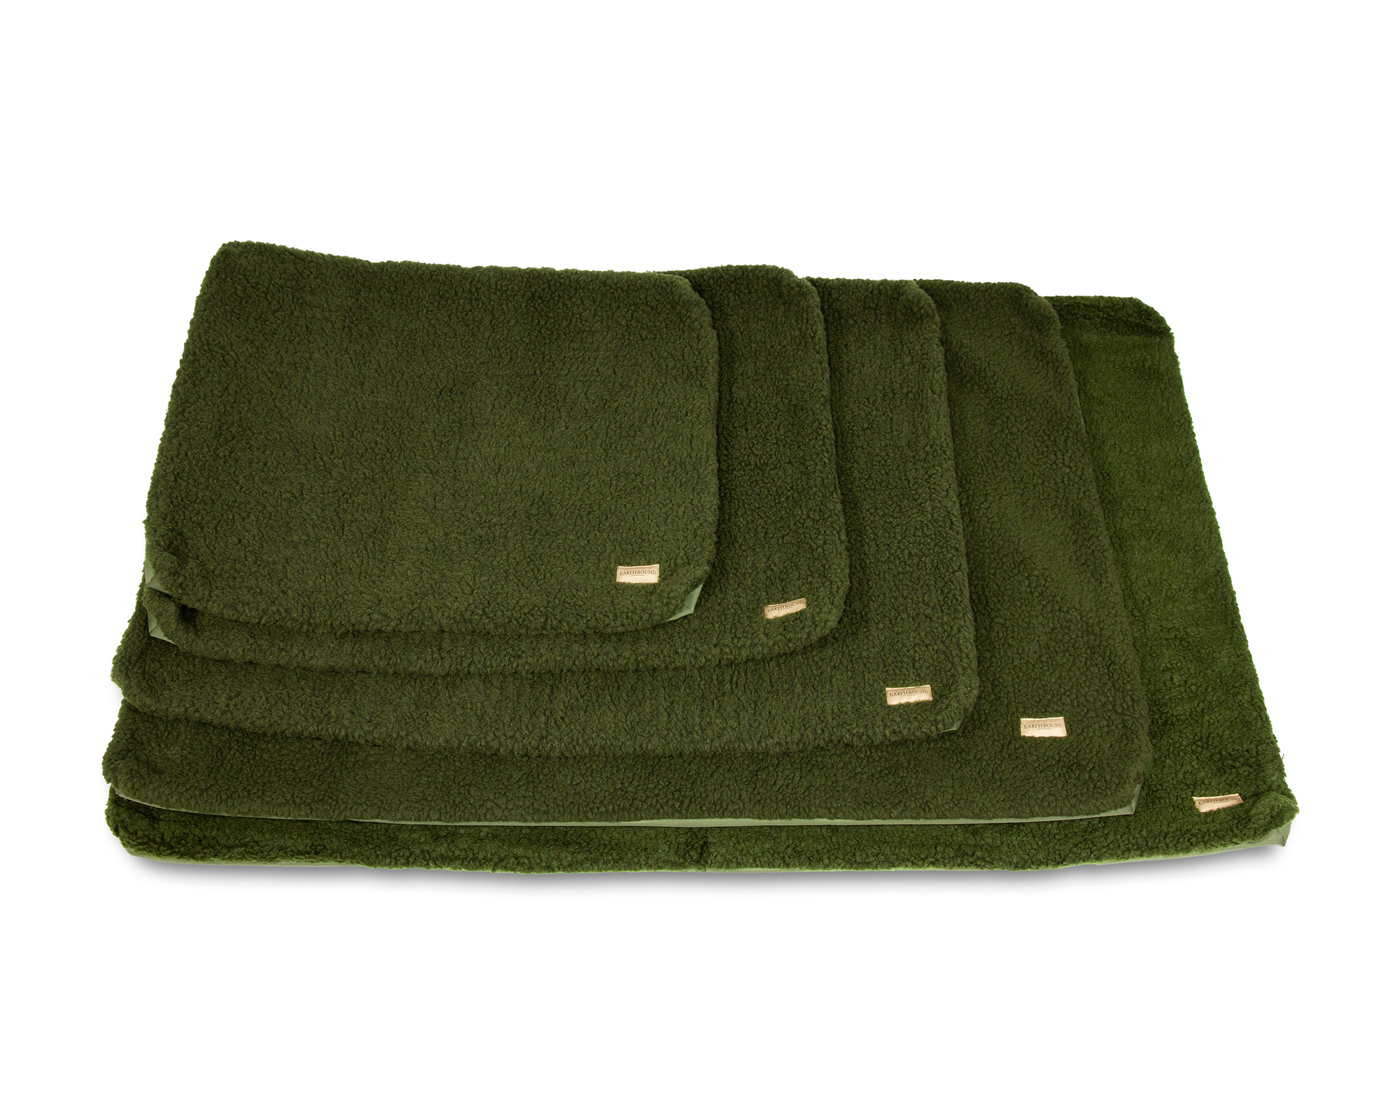 Crate mat removable green sherpa waterproof dog bed spare cover